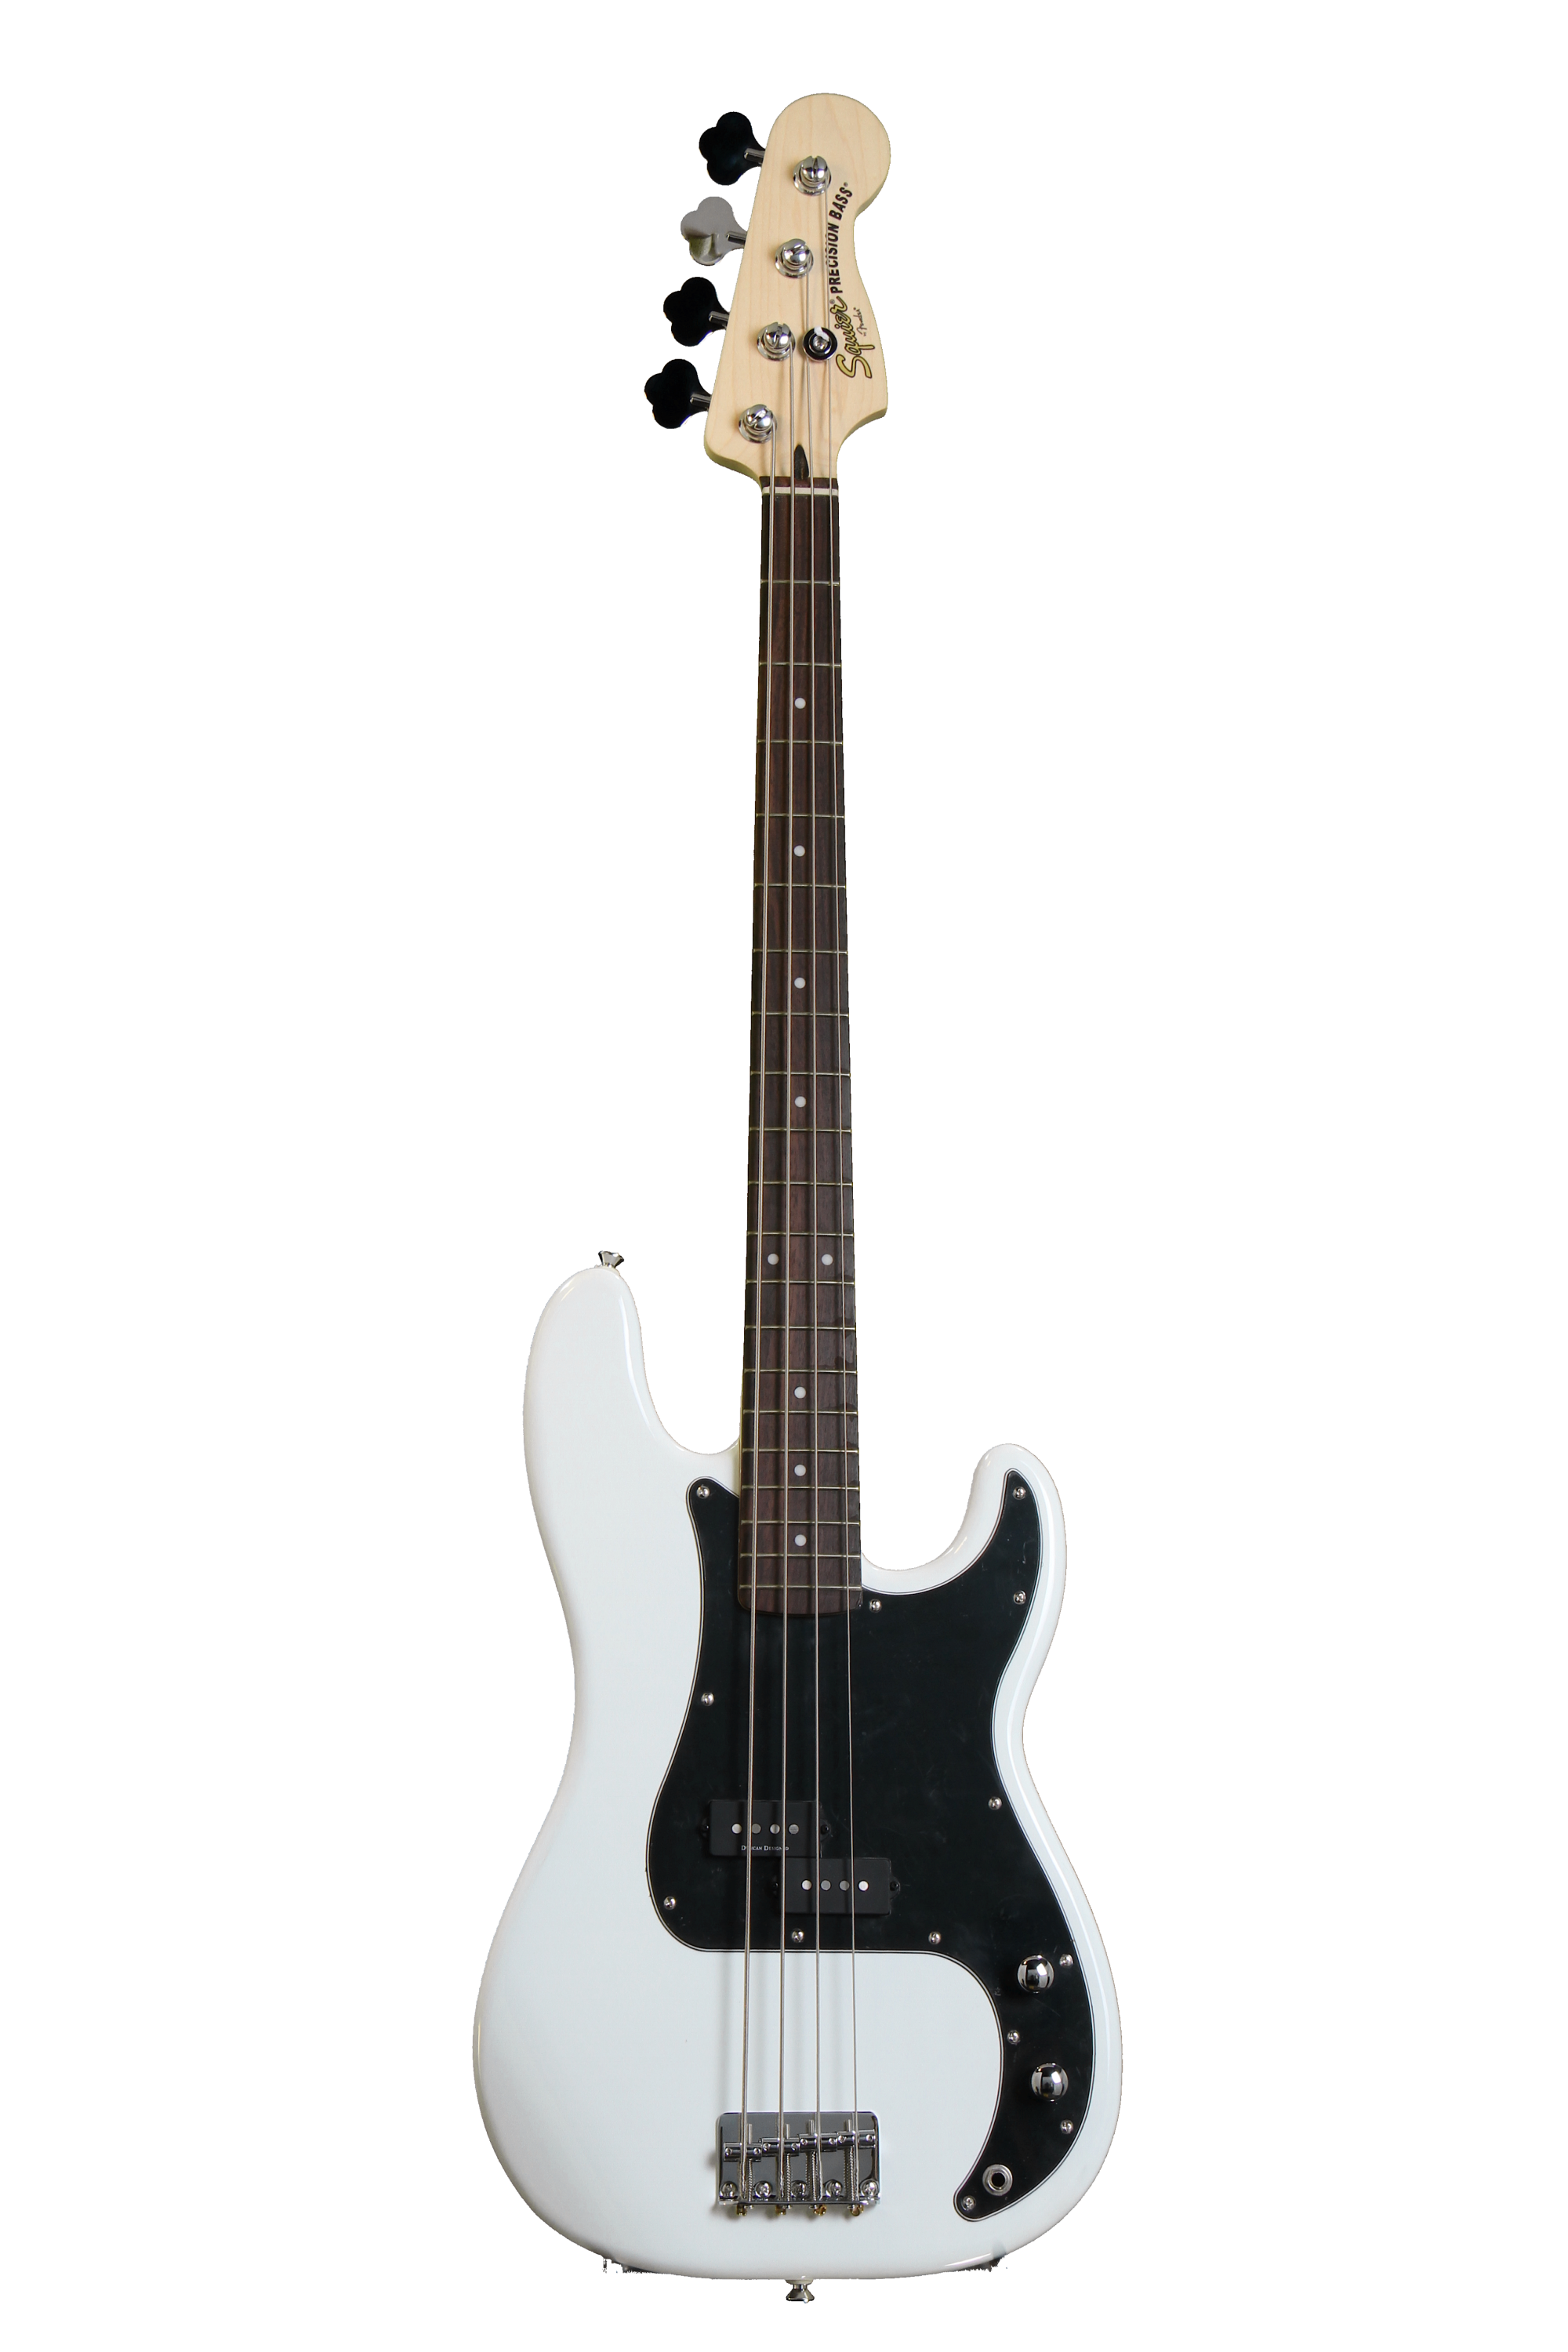 Squier Vintage Modified Precision Bass - White | Sweetwater